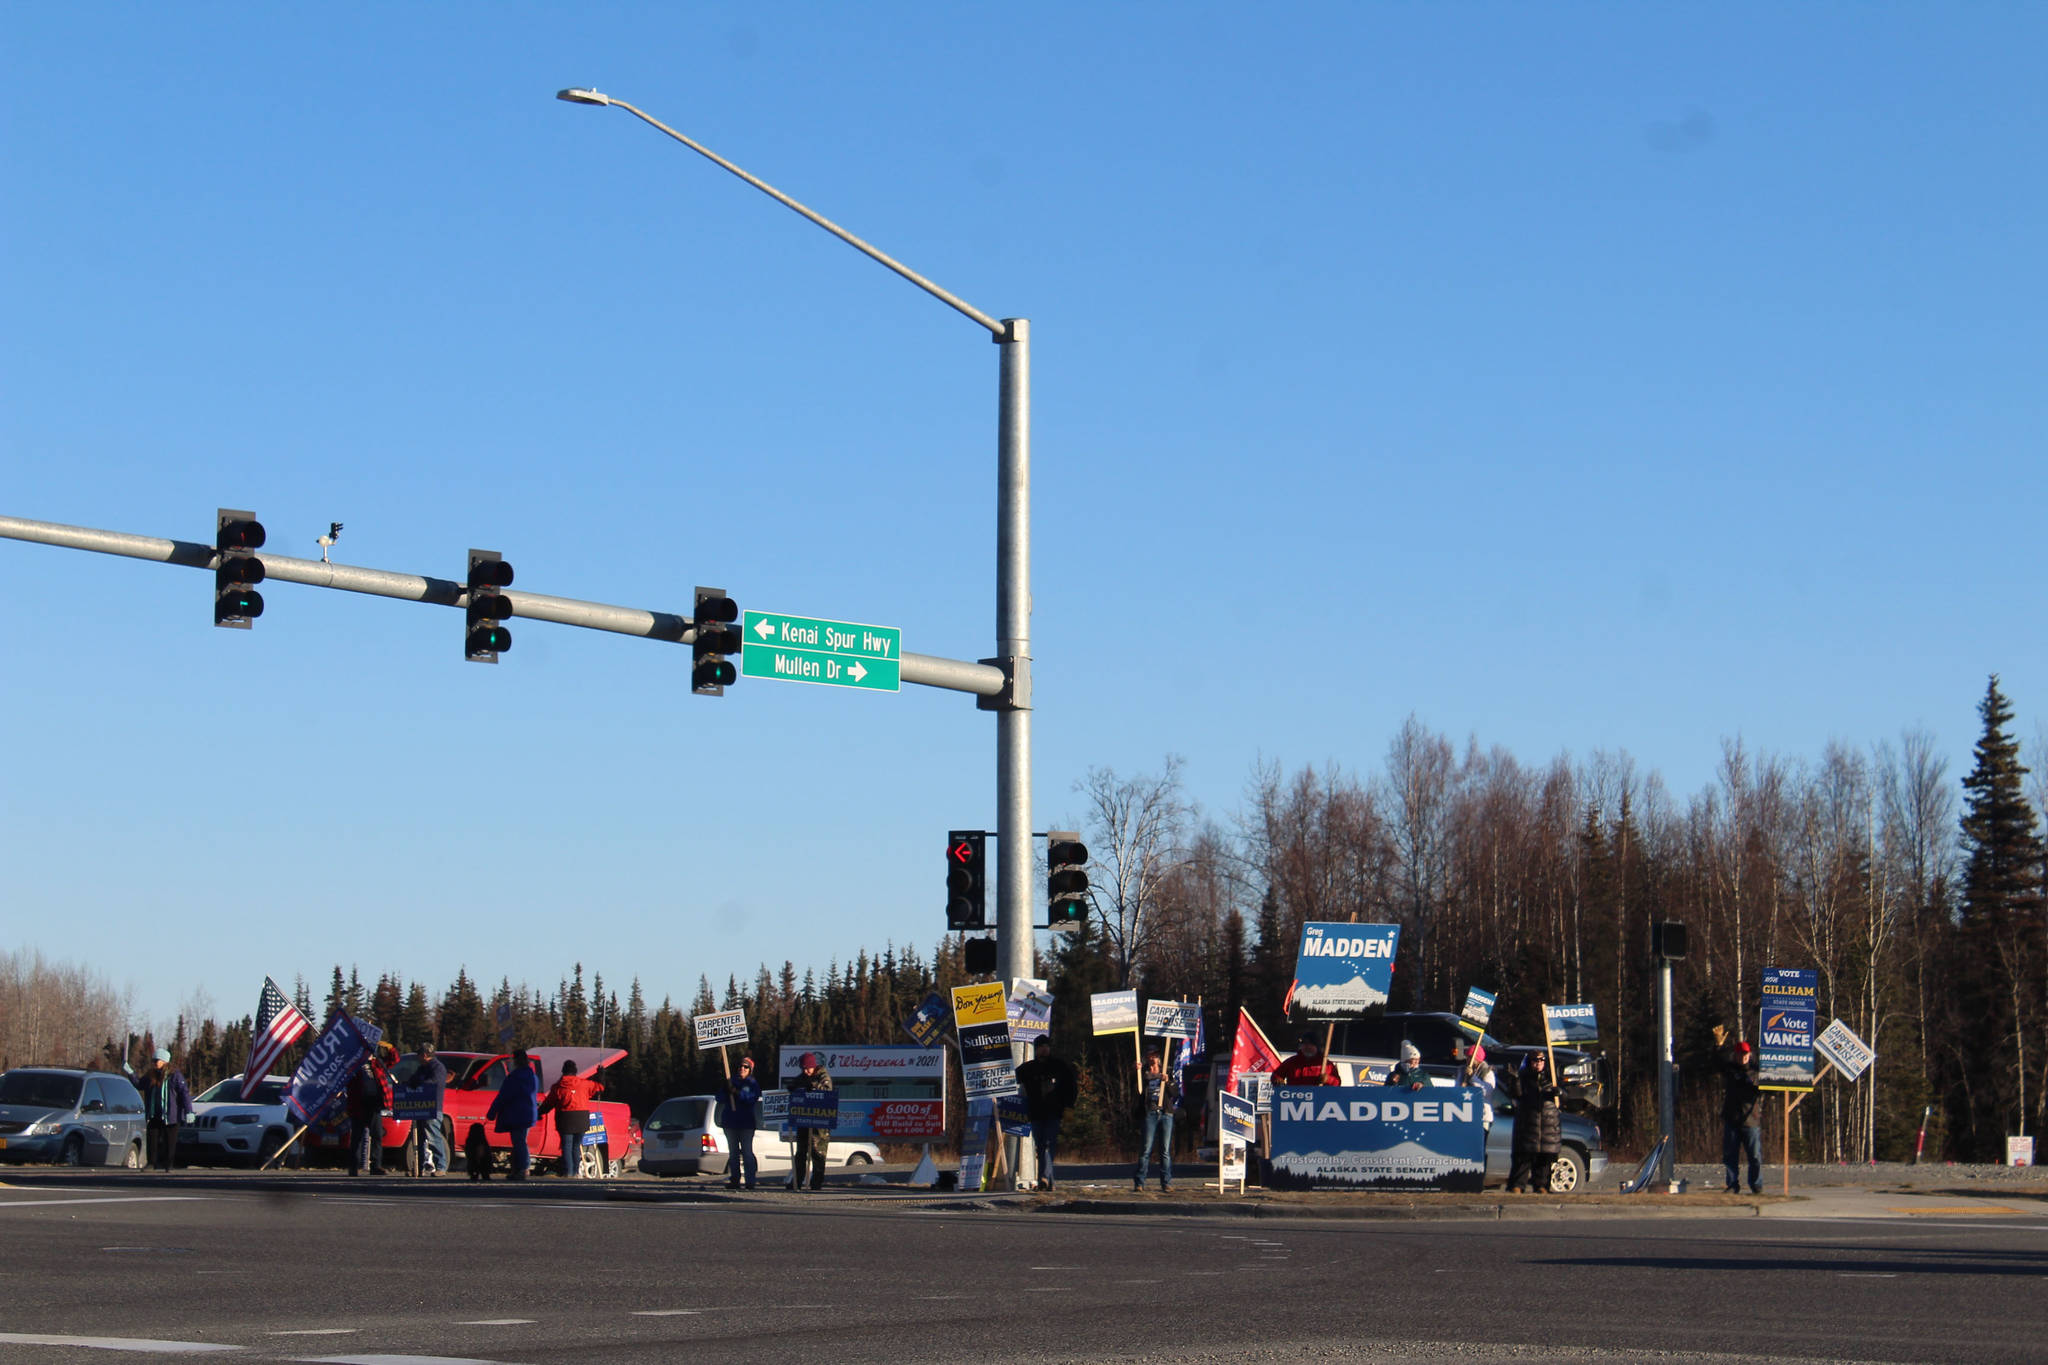 People are seen holding political signs at the intersection of Sterling Hwy. and Kenai Spur Hwy. on Tuesday, Nov. 3 in Soldotna, Alaska. (Photo by Ashlyn O’Hara/Peninsula Clarion)